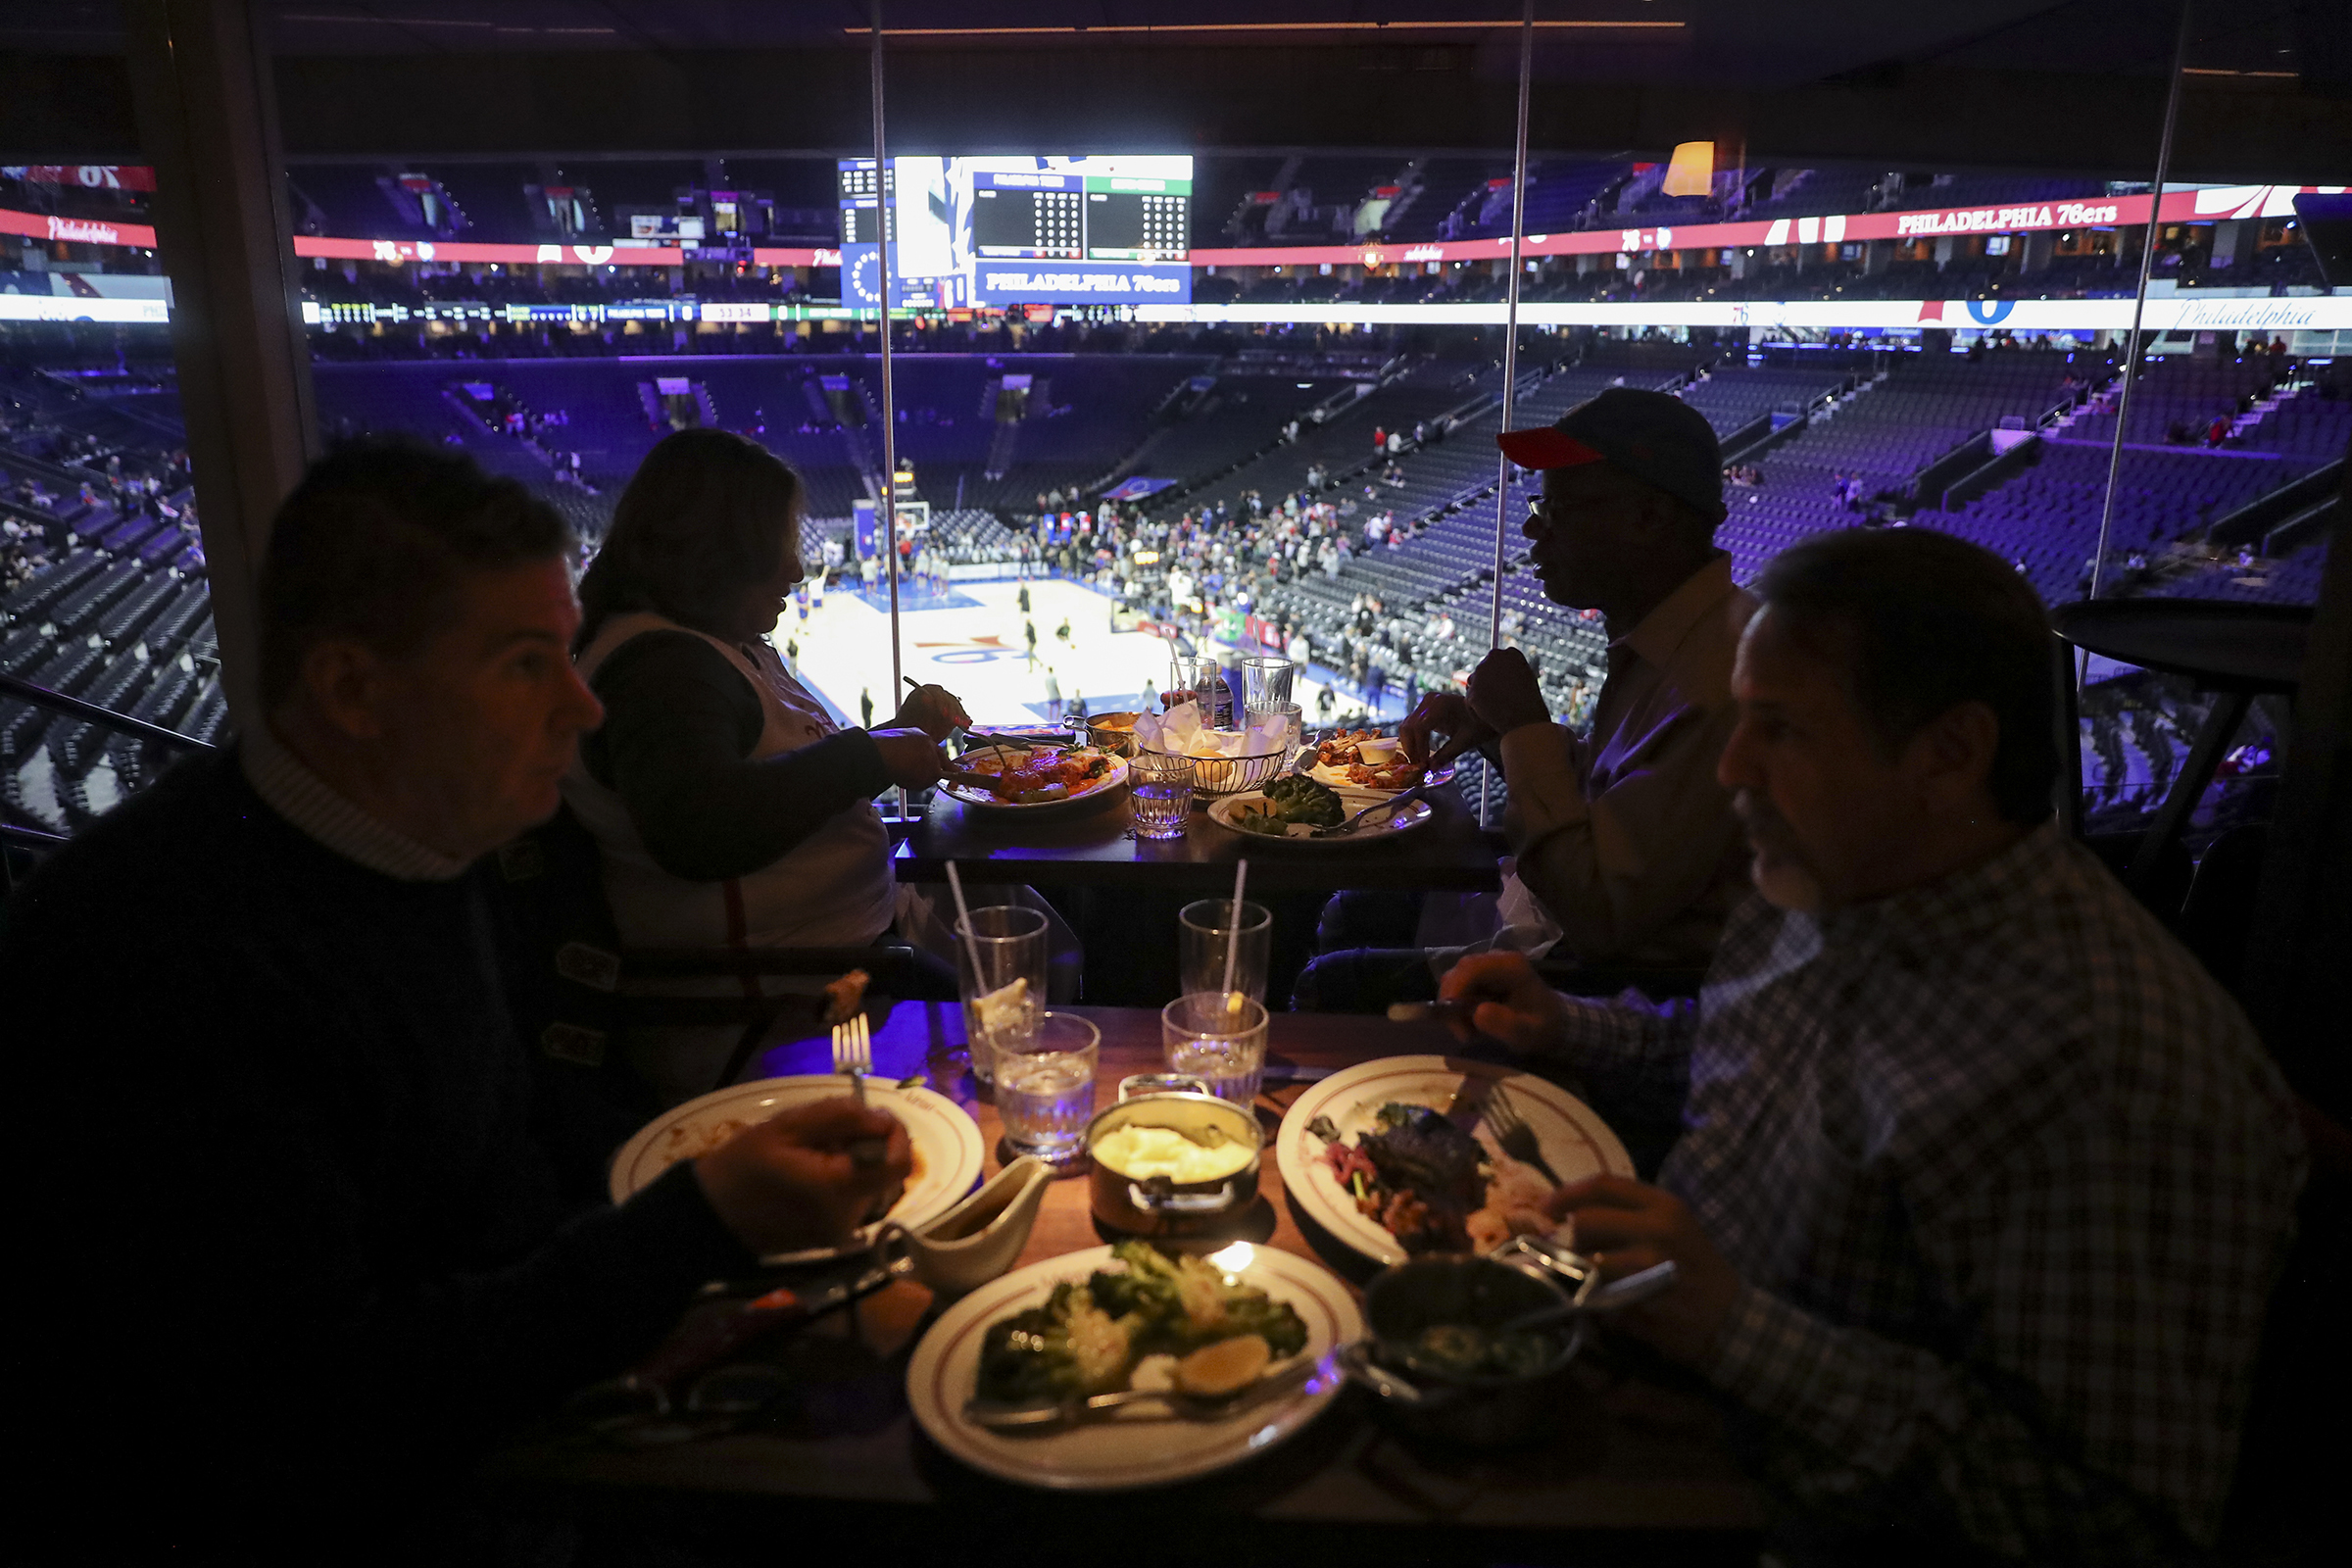 All the upgrades at the 'new' Wells Fargo Center, aimed at today's